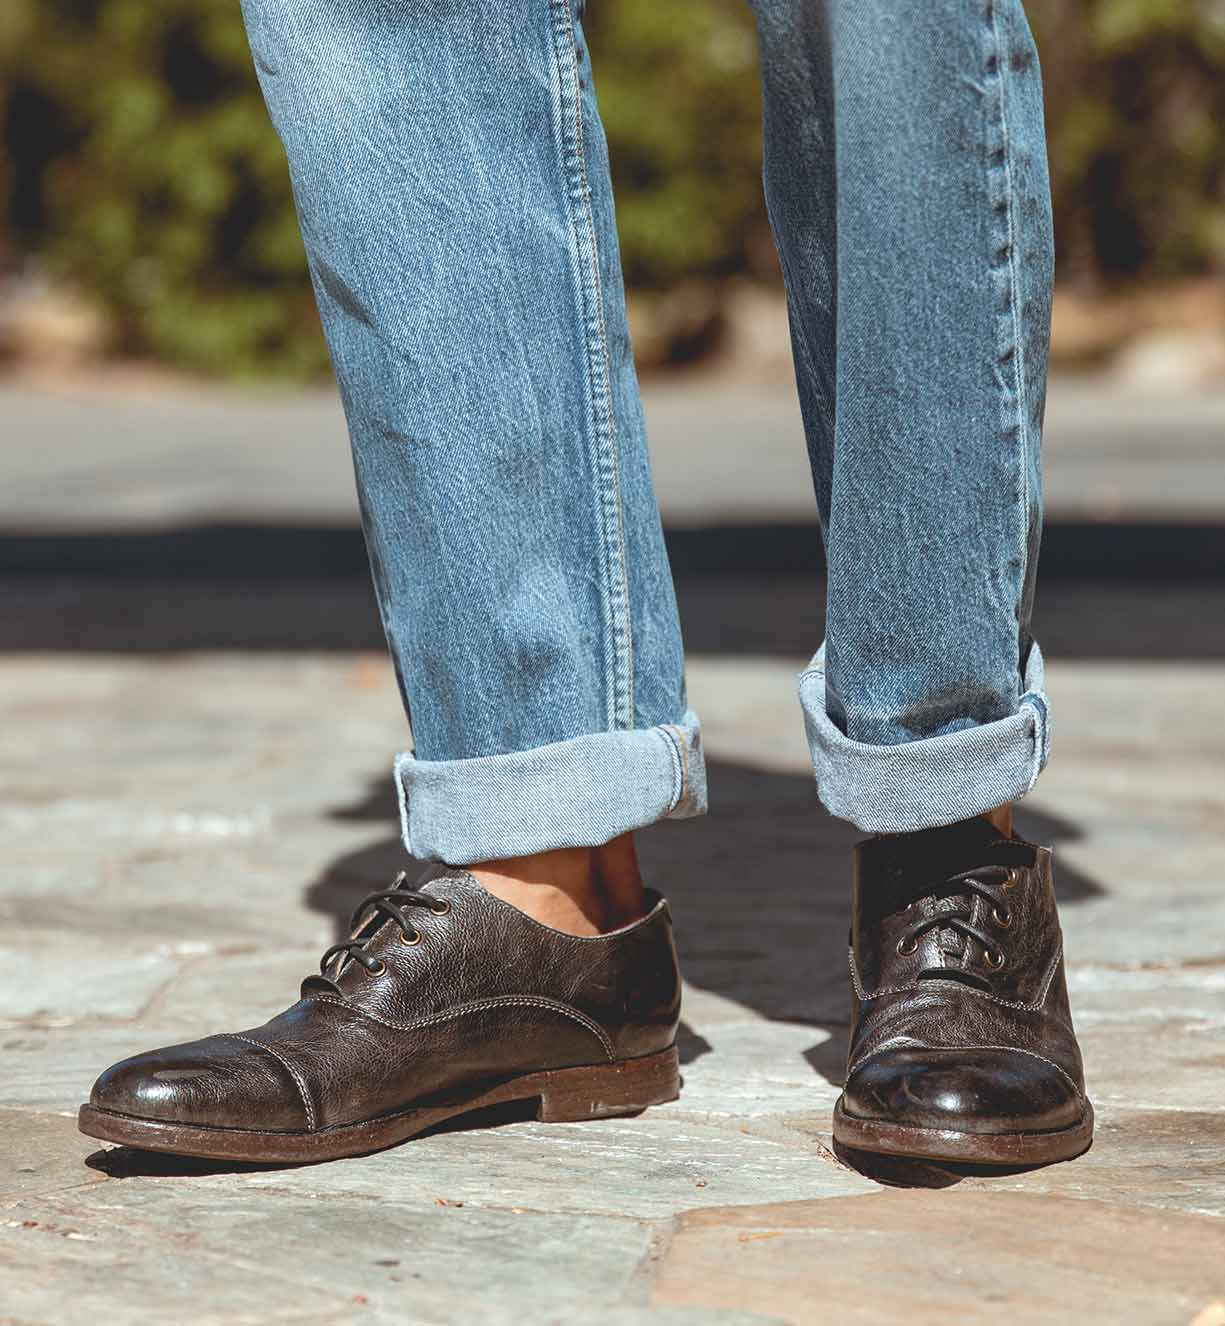 A man wearing jeans and a pair of black Bed Stu Donatello oxford shoes.